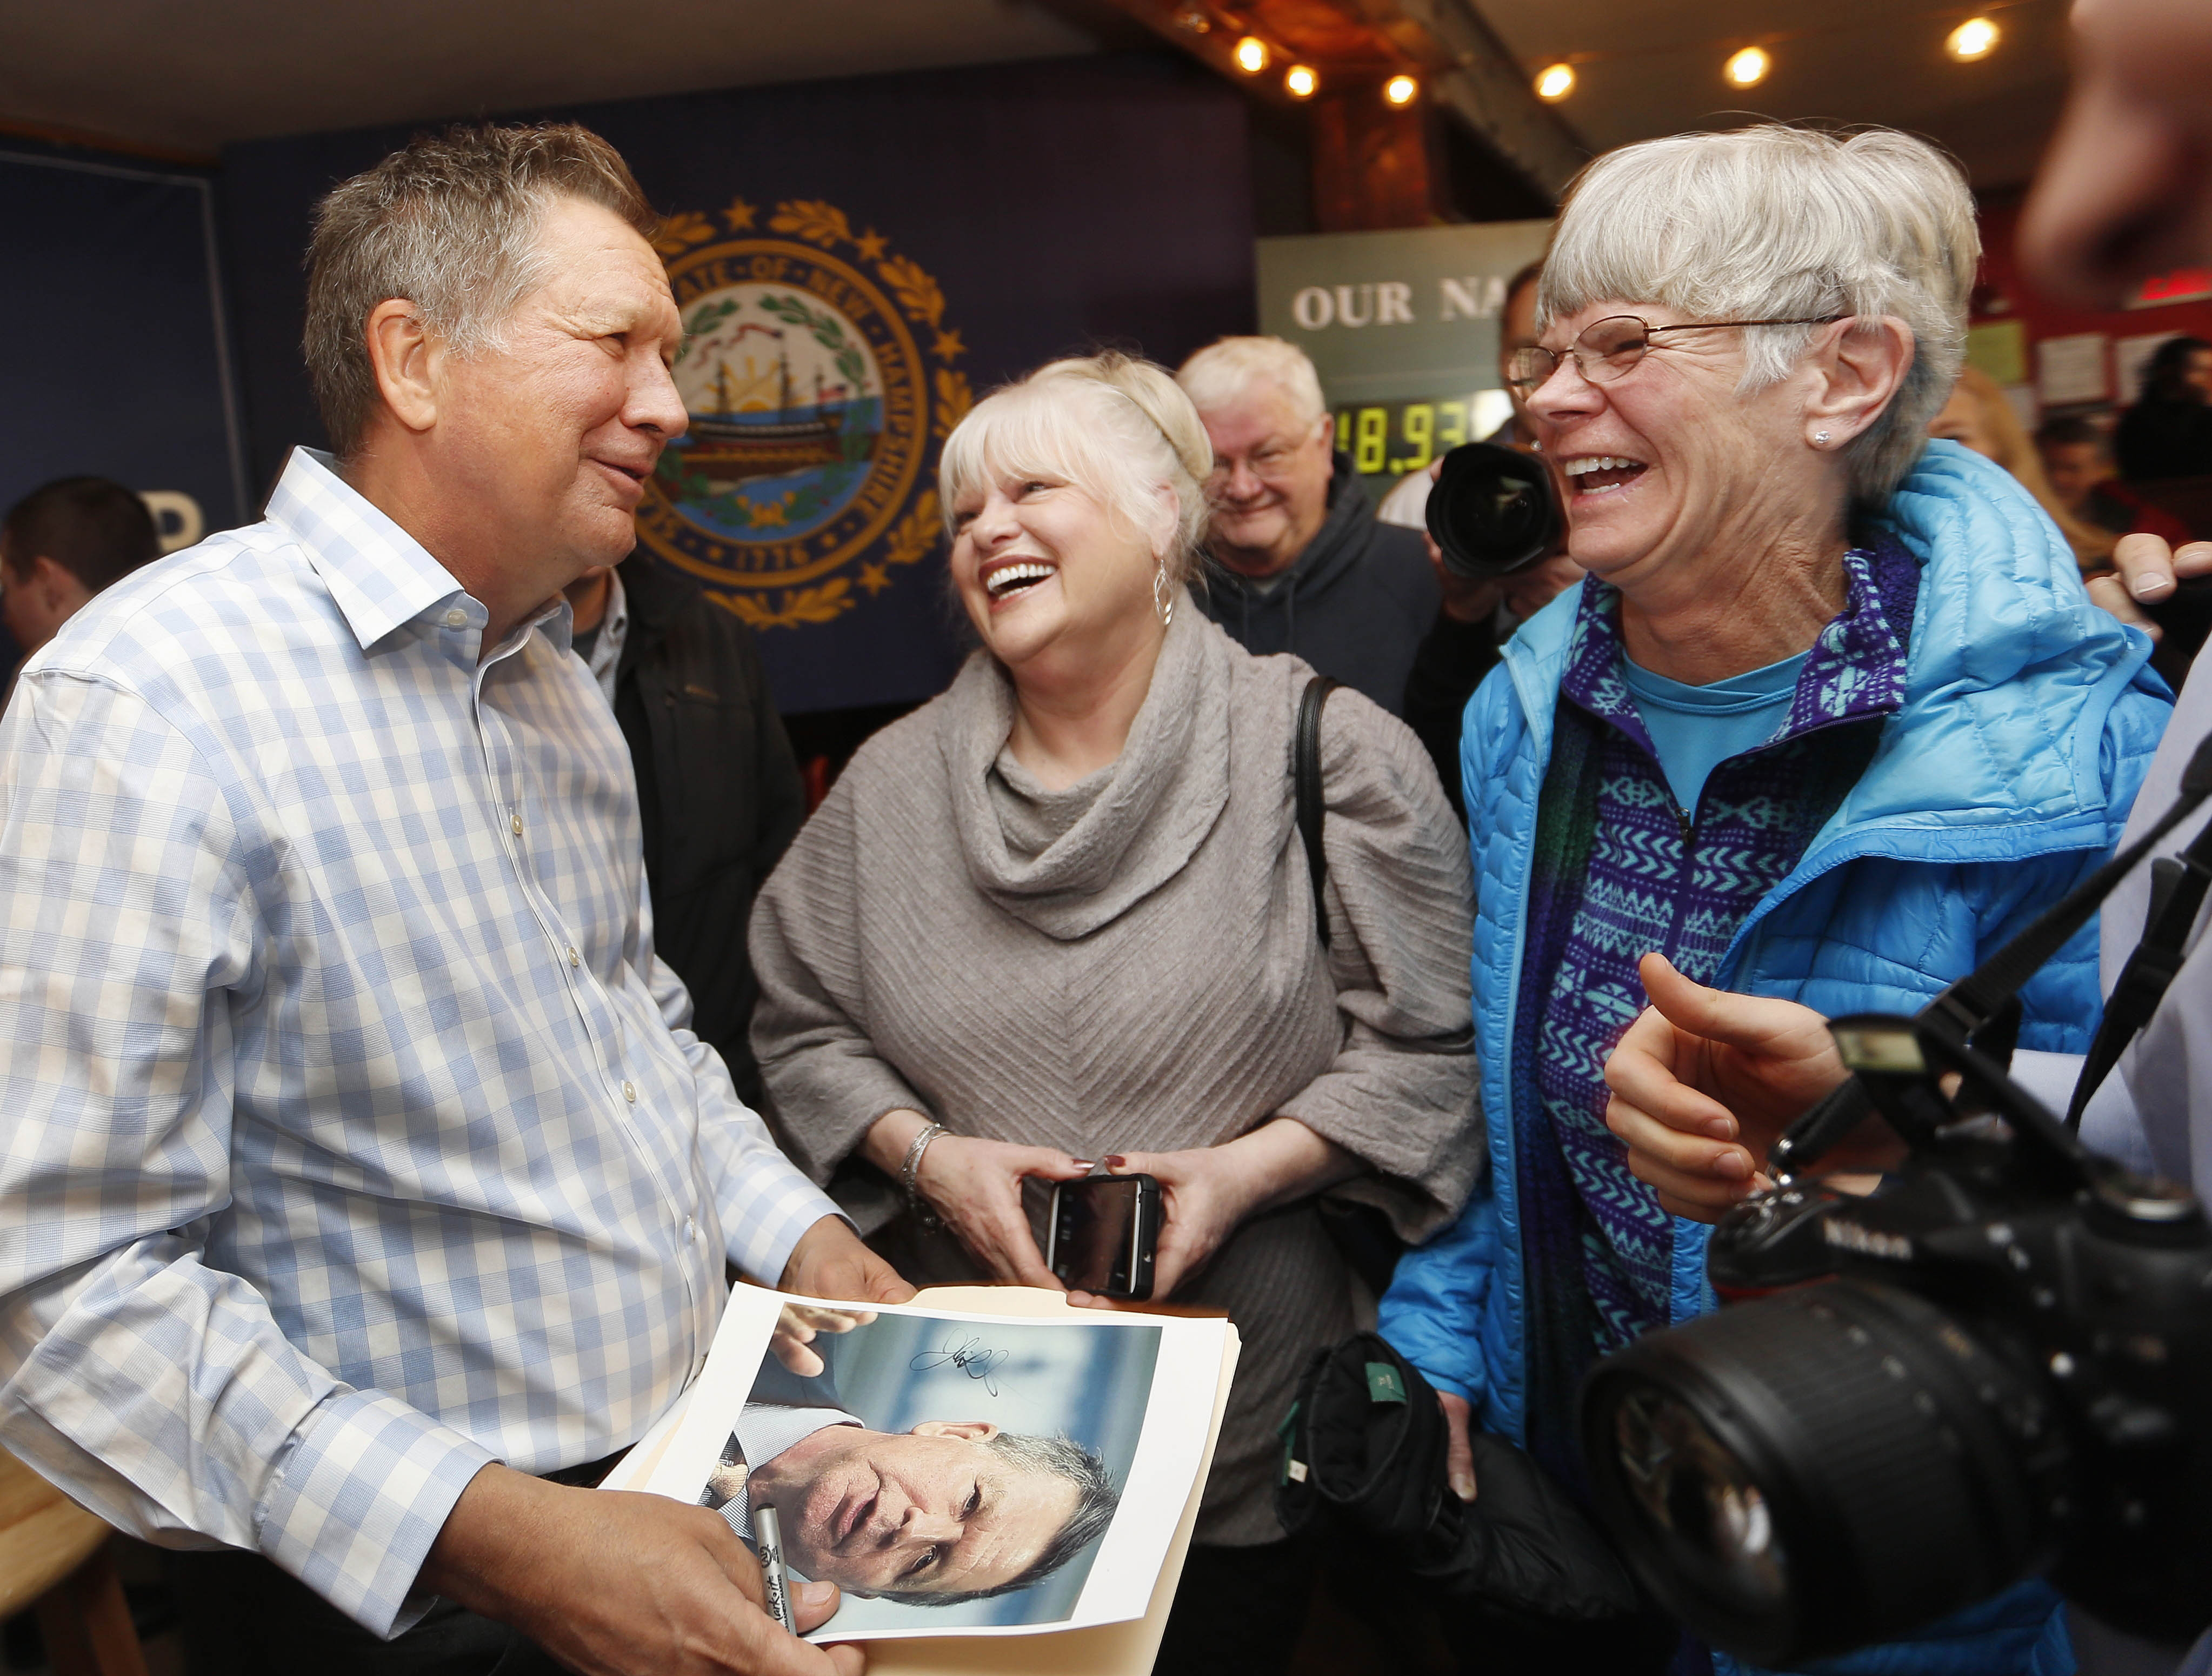 Republican presidential candidate and Ohio Governor John Kasich speaks to voters during a campaign stop at a music-club tavern called the Stone Church on Jan. 25, 2016, in Newmarket, N.H. (Jim Cole—AP)